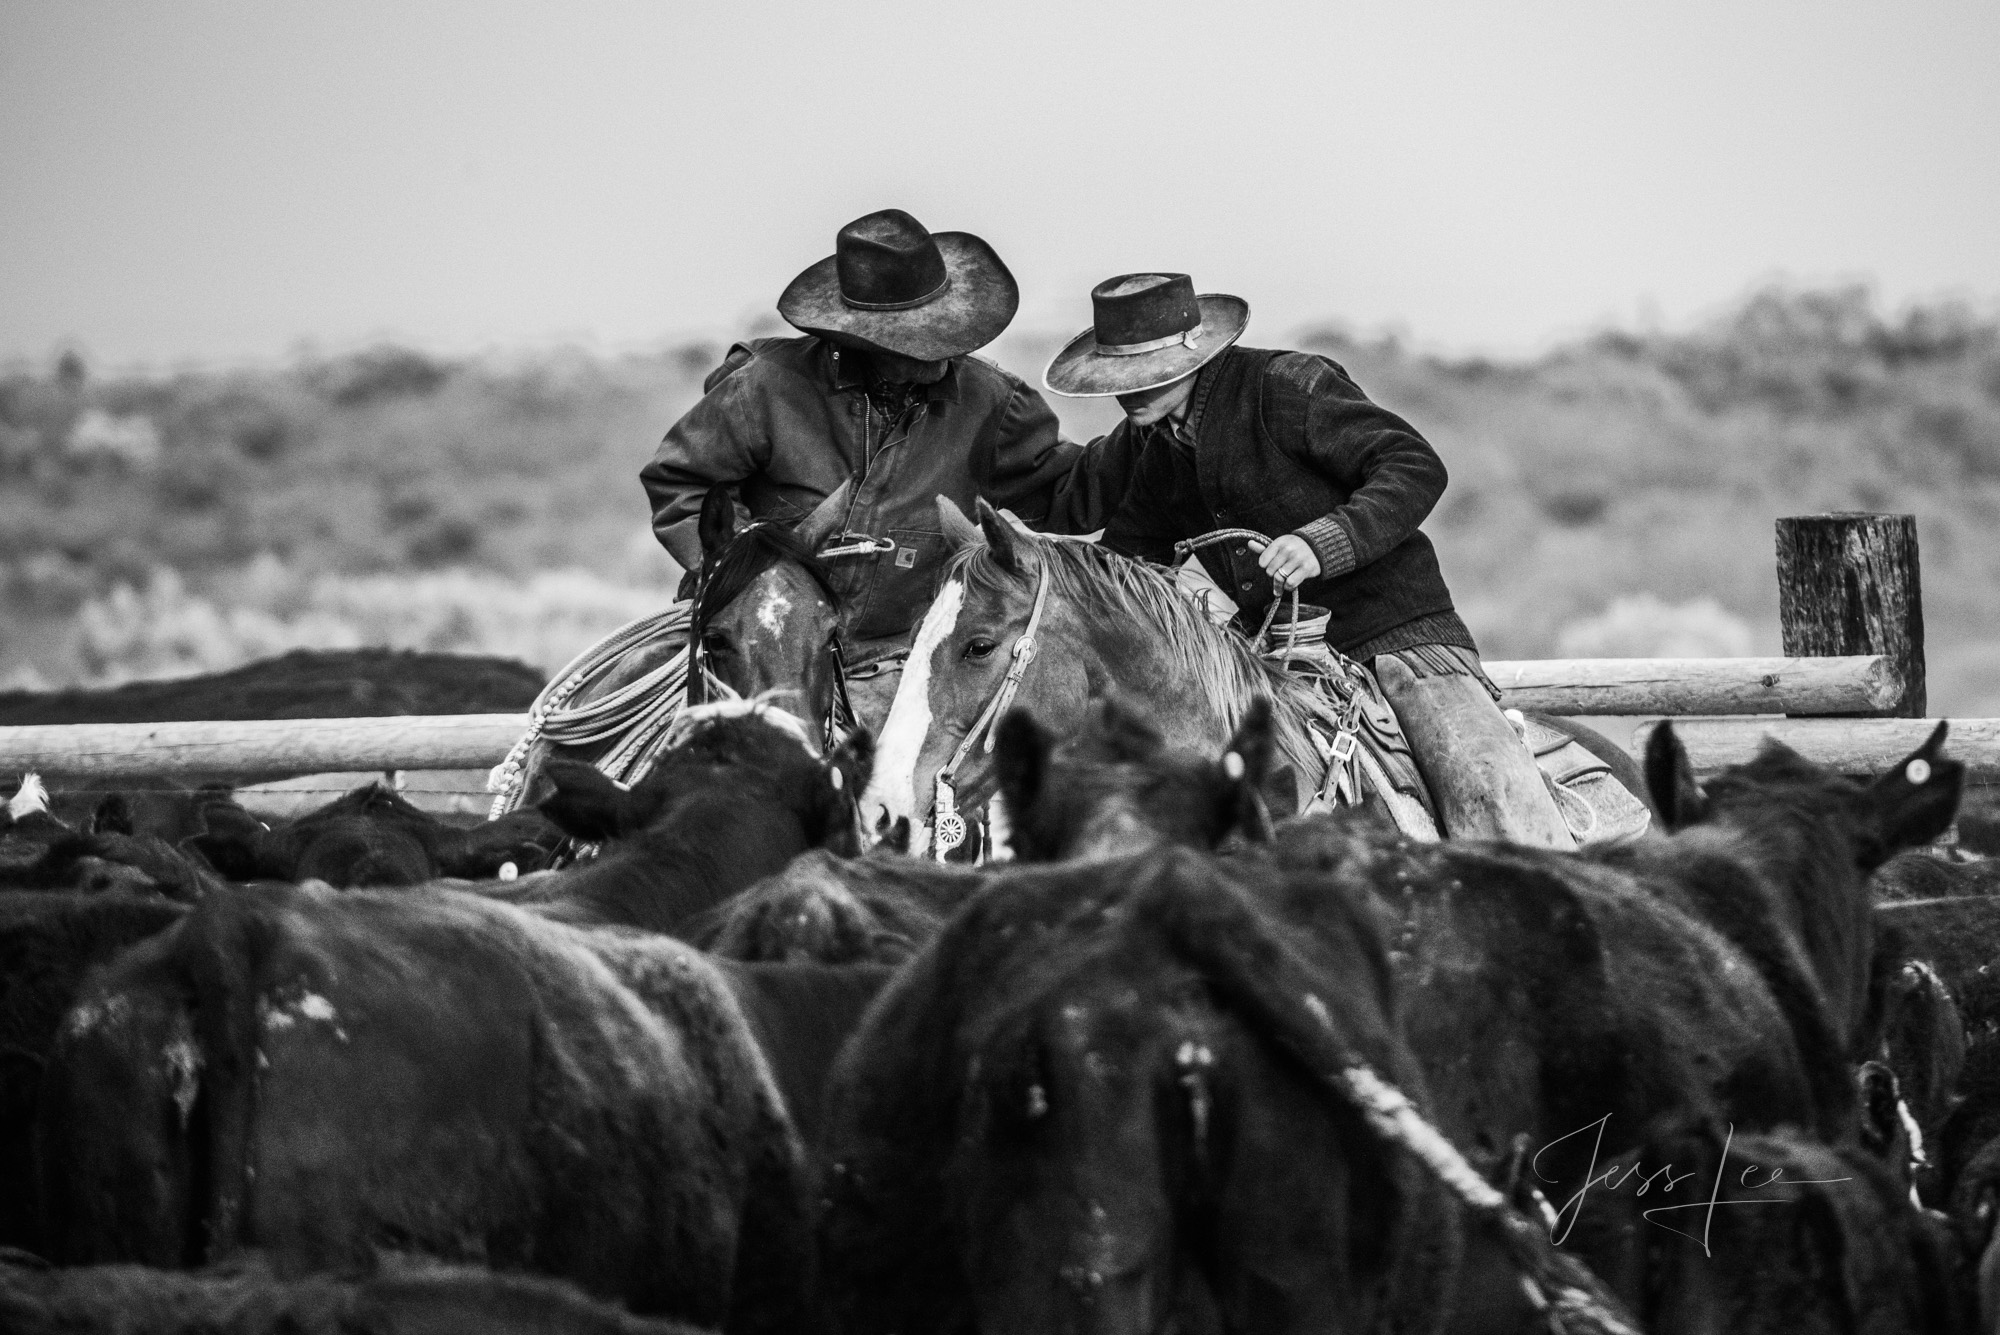 Fine Art Limited Edition Photo Prints of Cowboys, Horses, and life in the West.  Cowboy mentor pictures in black and white. This...